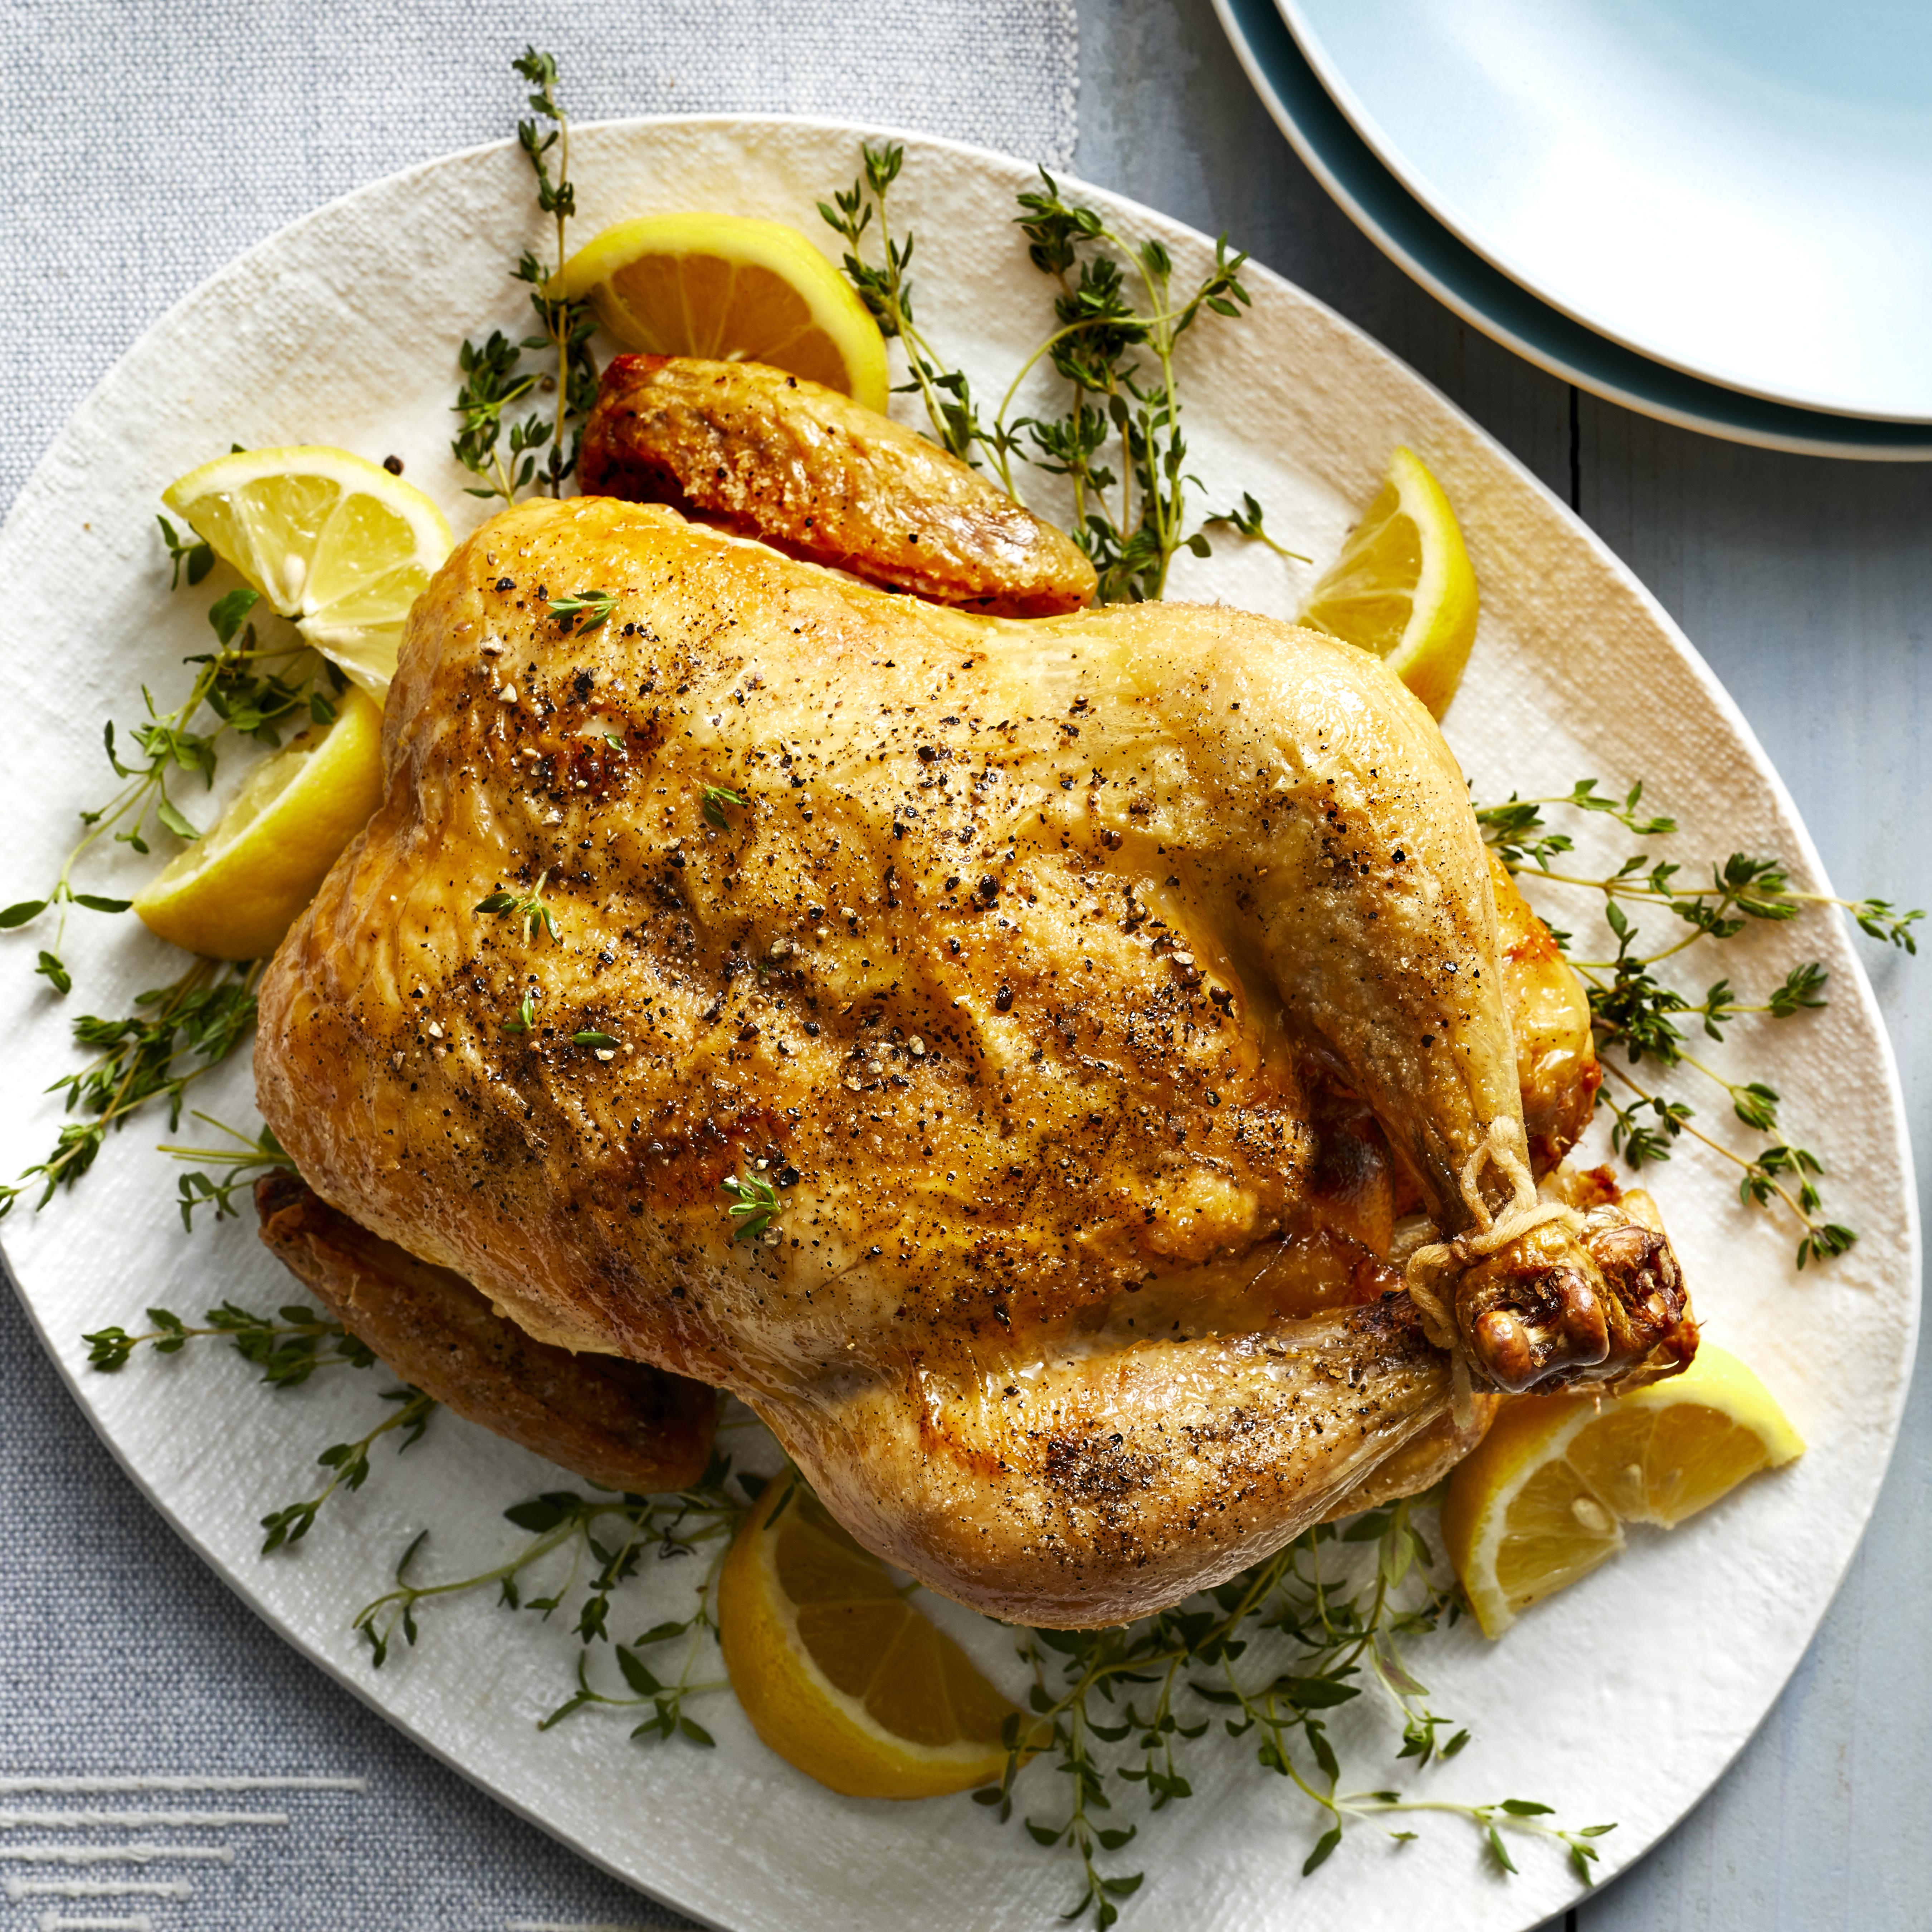 <p>Replicate the flavor, lovely burnished skin and moist texture of a classic rotisserie chicken with this easy recipe for cooking a whole chicken in your air fryer. With just a handful of ingredients and 10 minutes of active time, you get a roast chicken with lemon and herbs that's a remarkable doppelganger for a deli chicken right after it comes out of the rotisserie--before it gets shriveled and dried out from sitting in the deli's holding case for hours. Serve this chicken with your favorite veggie sides for a healthy weeknight dinner or weekend supper. And if you're hosting a dinner party, cooking your main course in the air fryer is also a great way free up oven space for casseroles, rolls and other dishes.</p>
                          